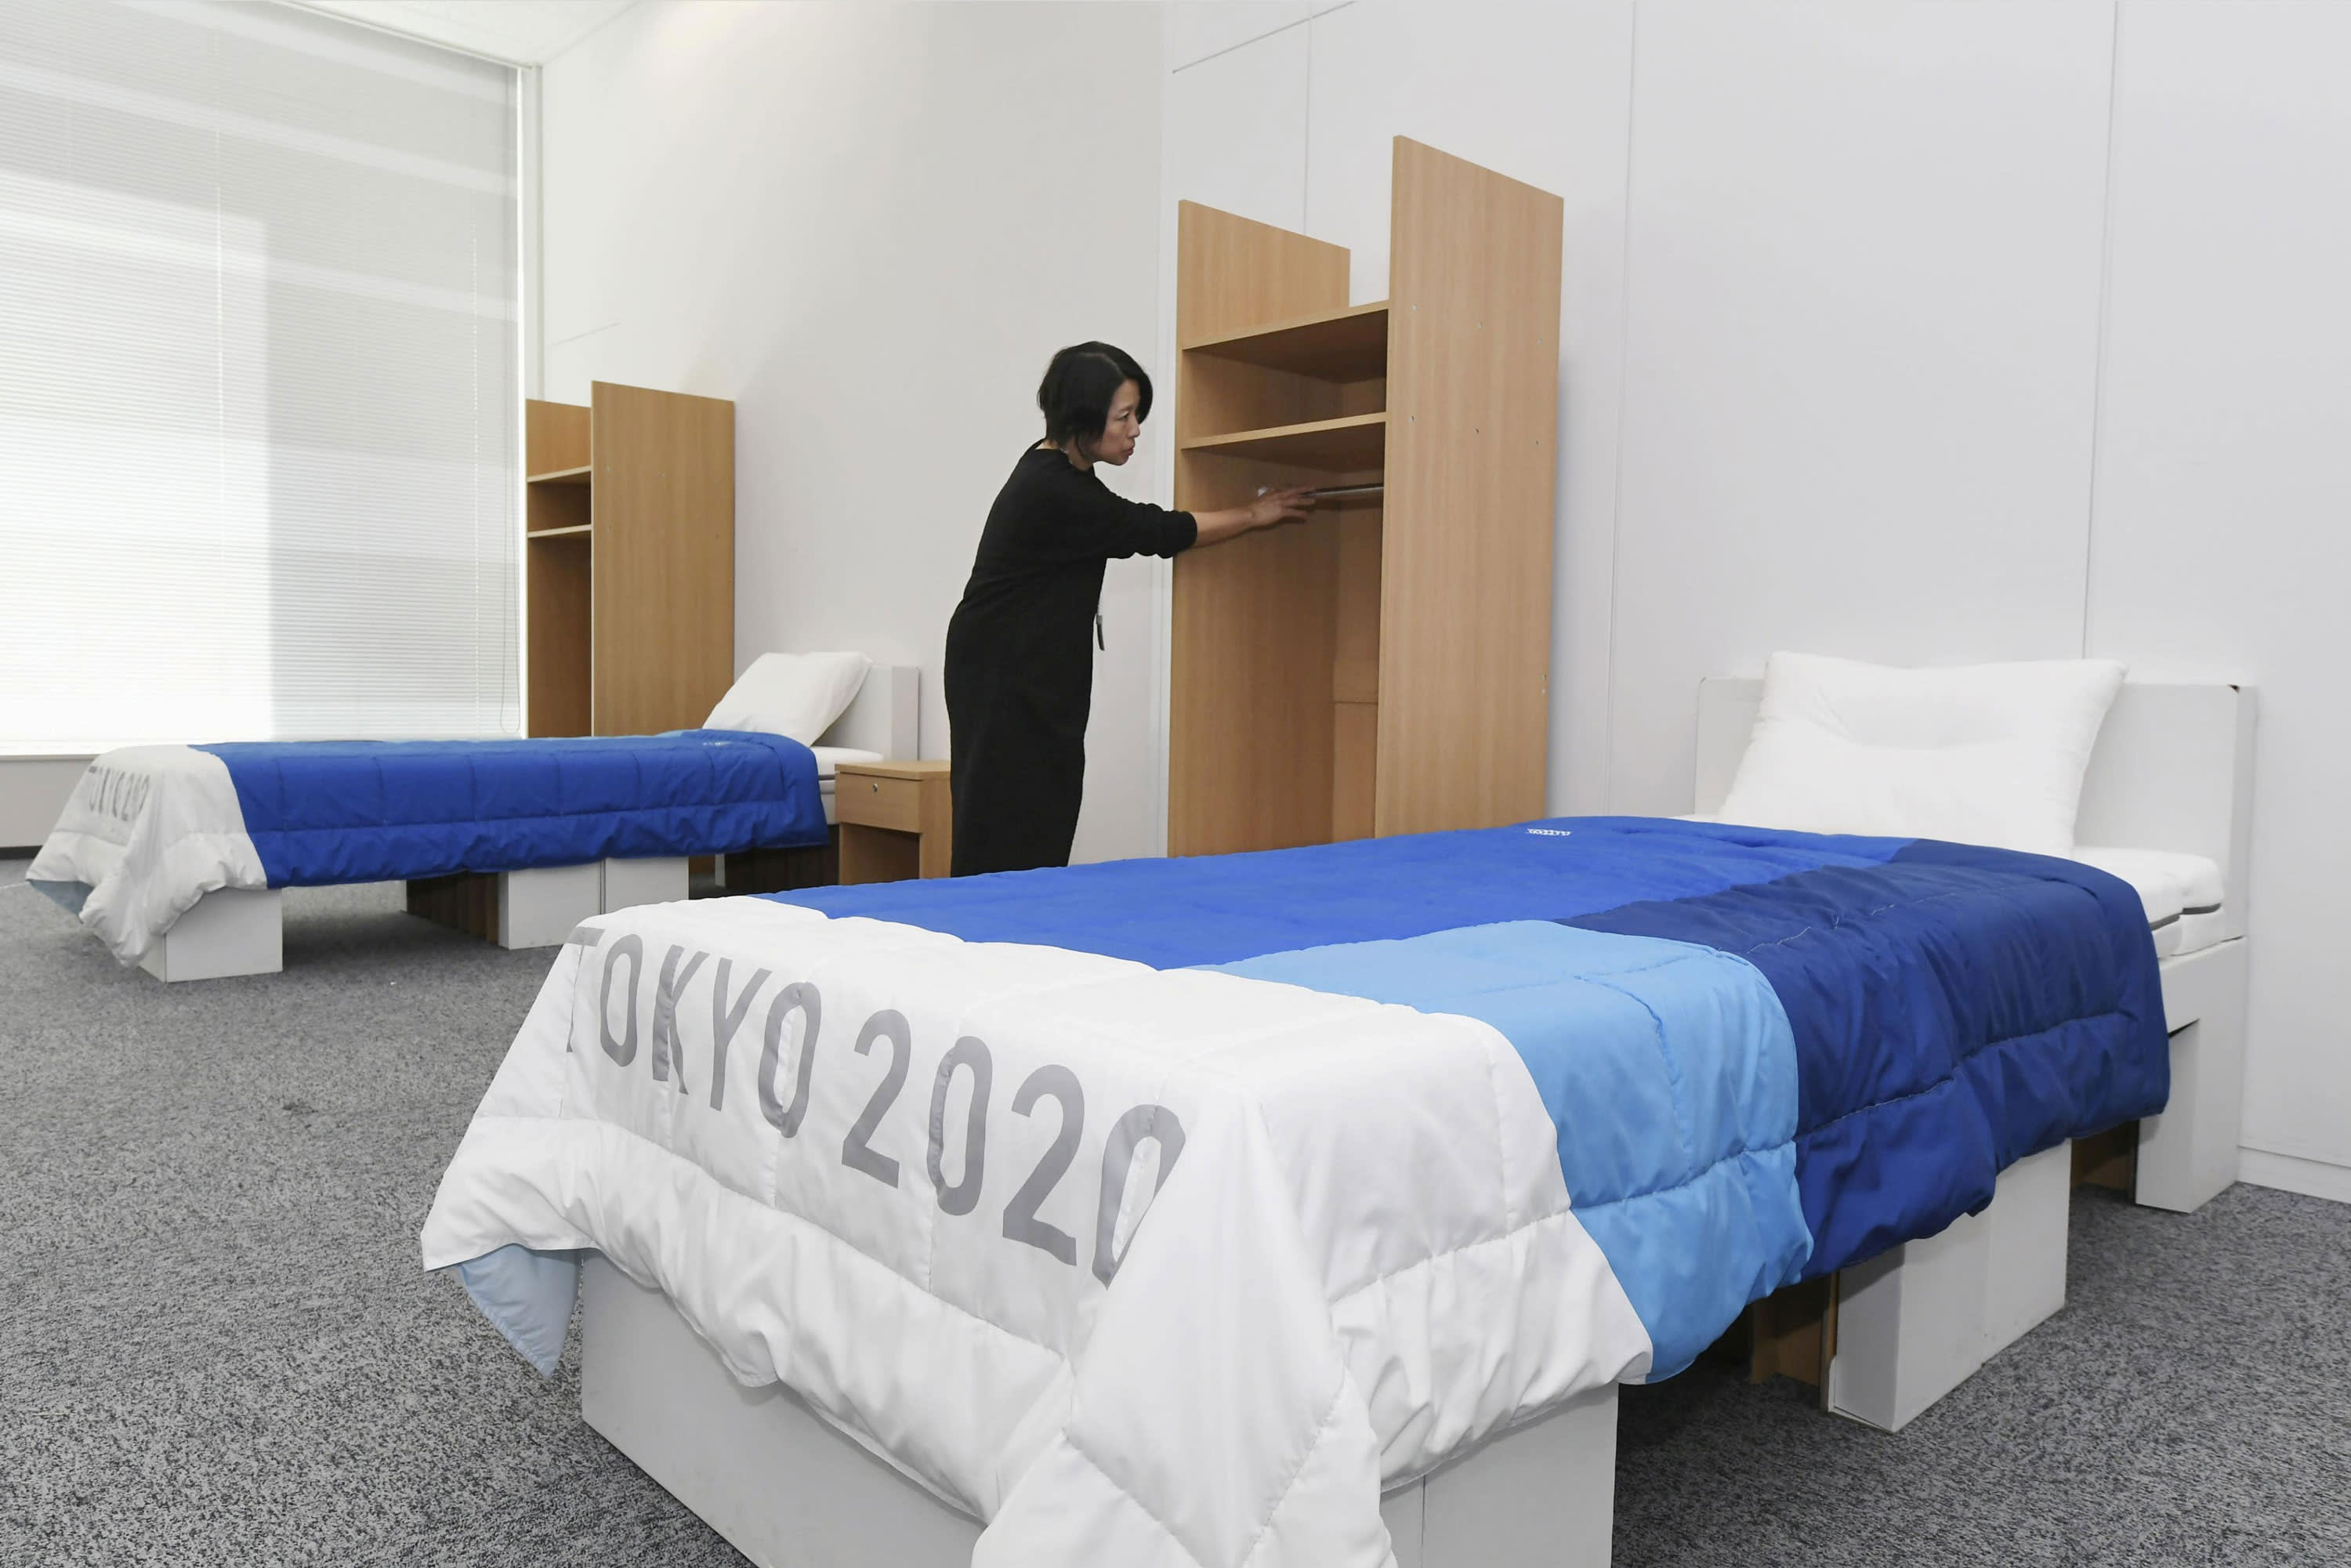 The Olympic Village, which accommodates all of the athletes competing in the games and is off-limits to non-athletes, will have 18,000 beds with frame